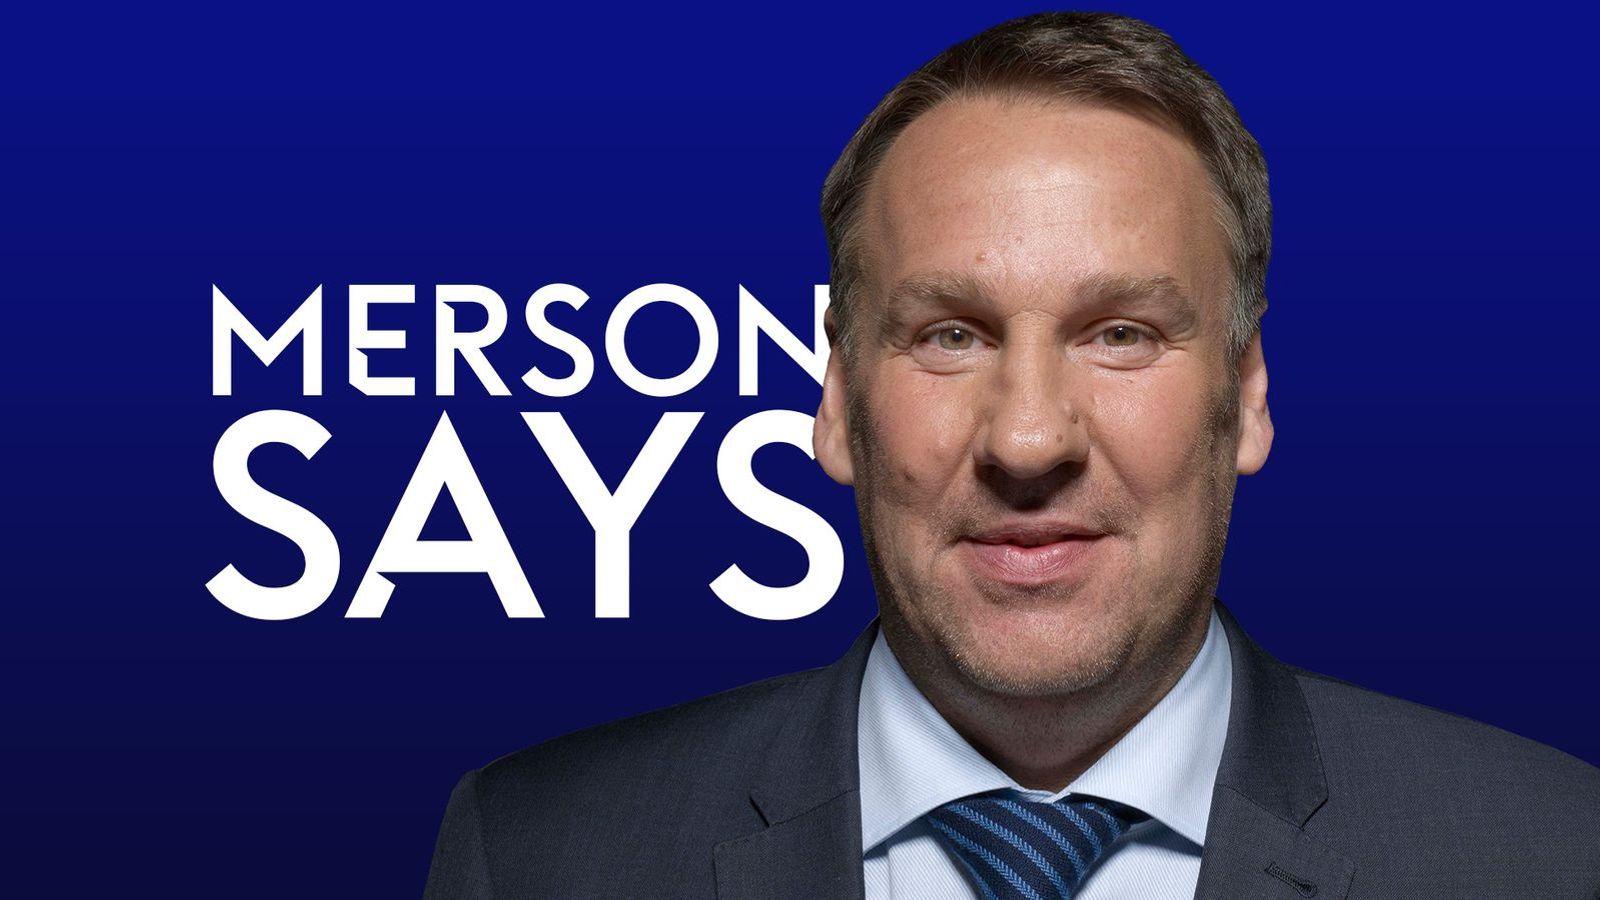 Liverpool have no chance of Champions League progress against Real Madrid, says Paul Merson | Football News